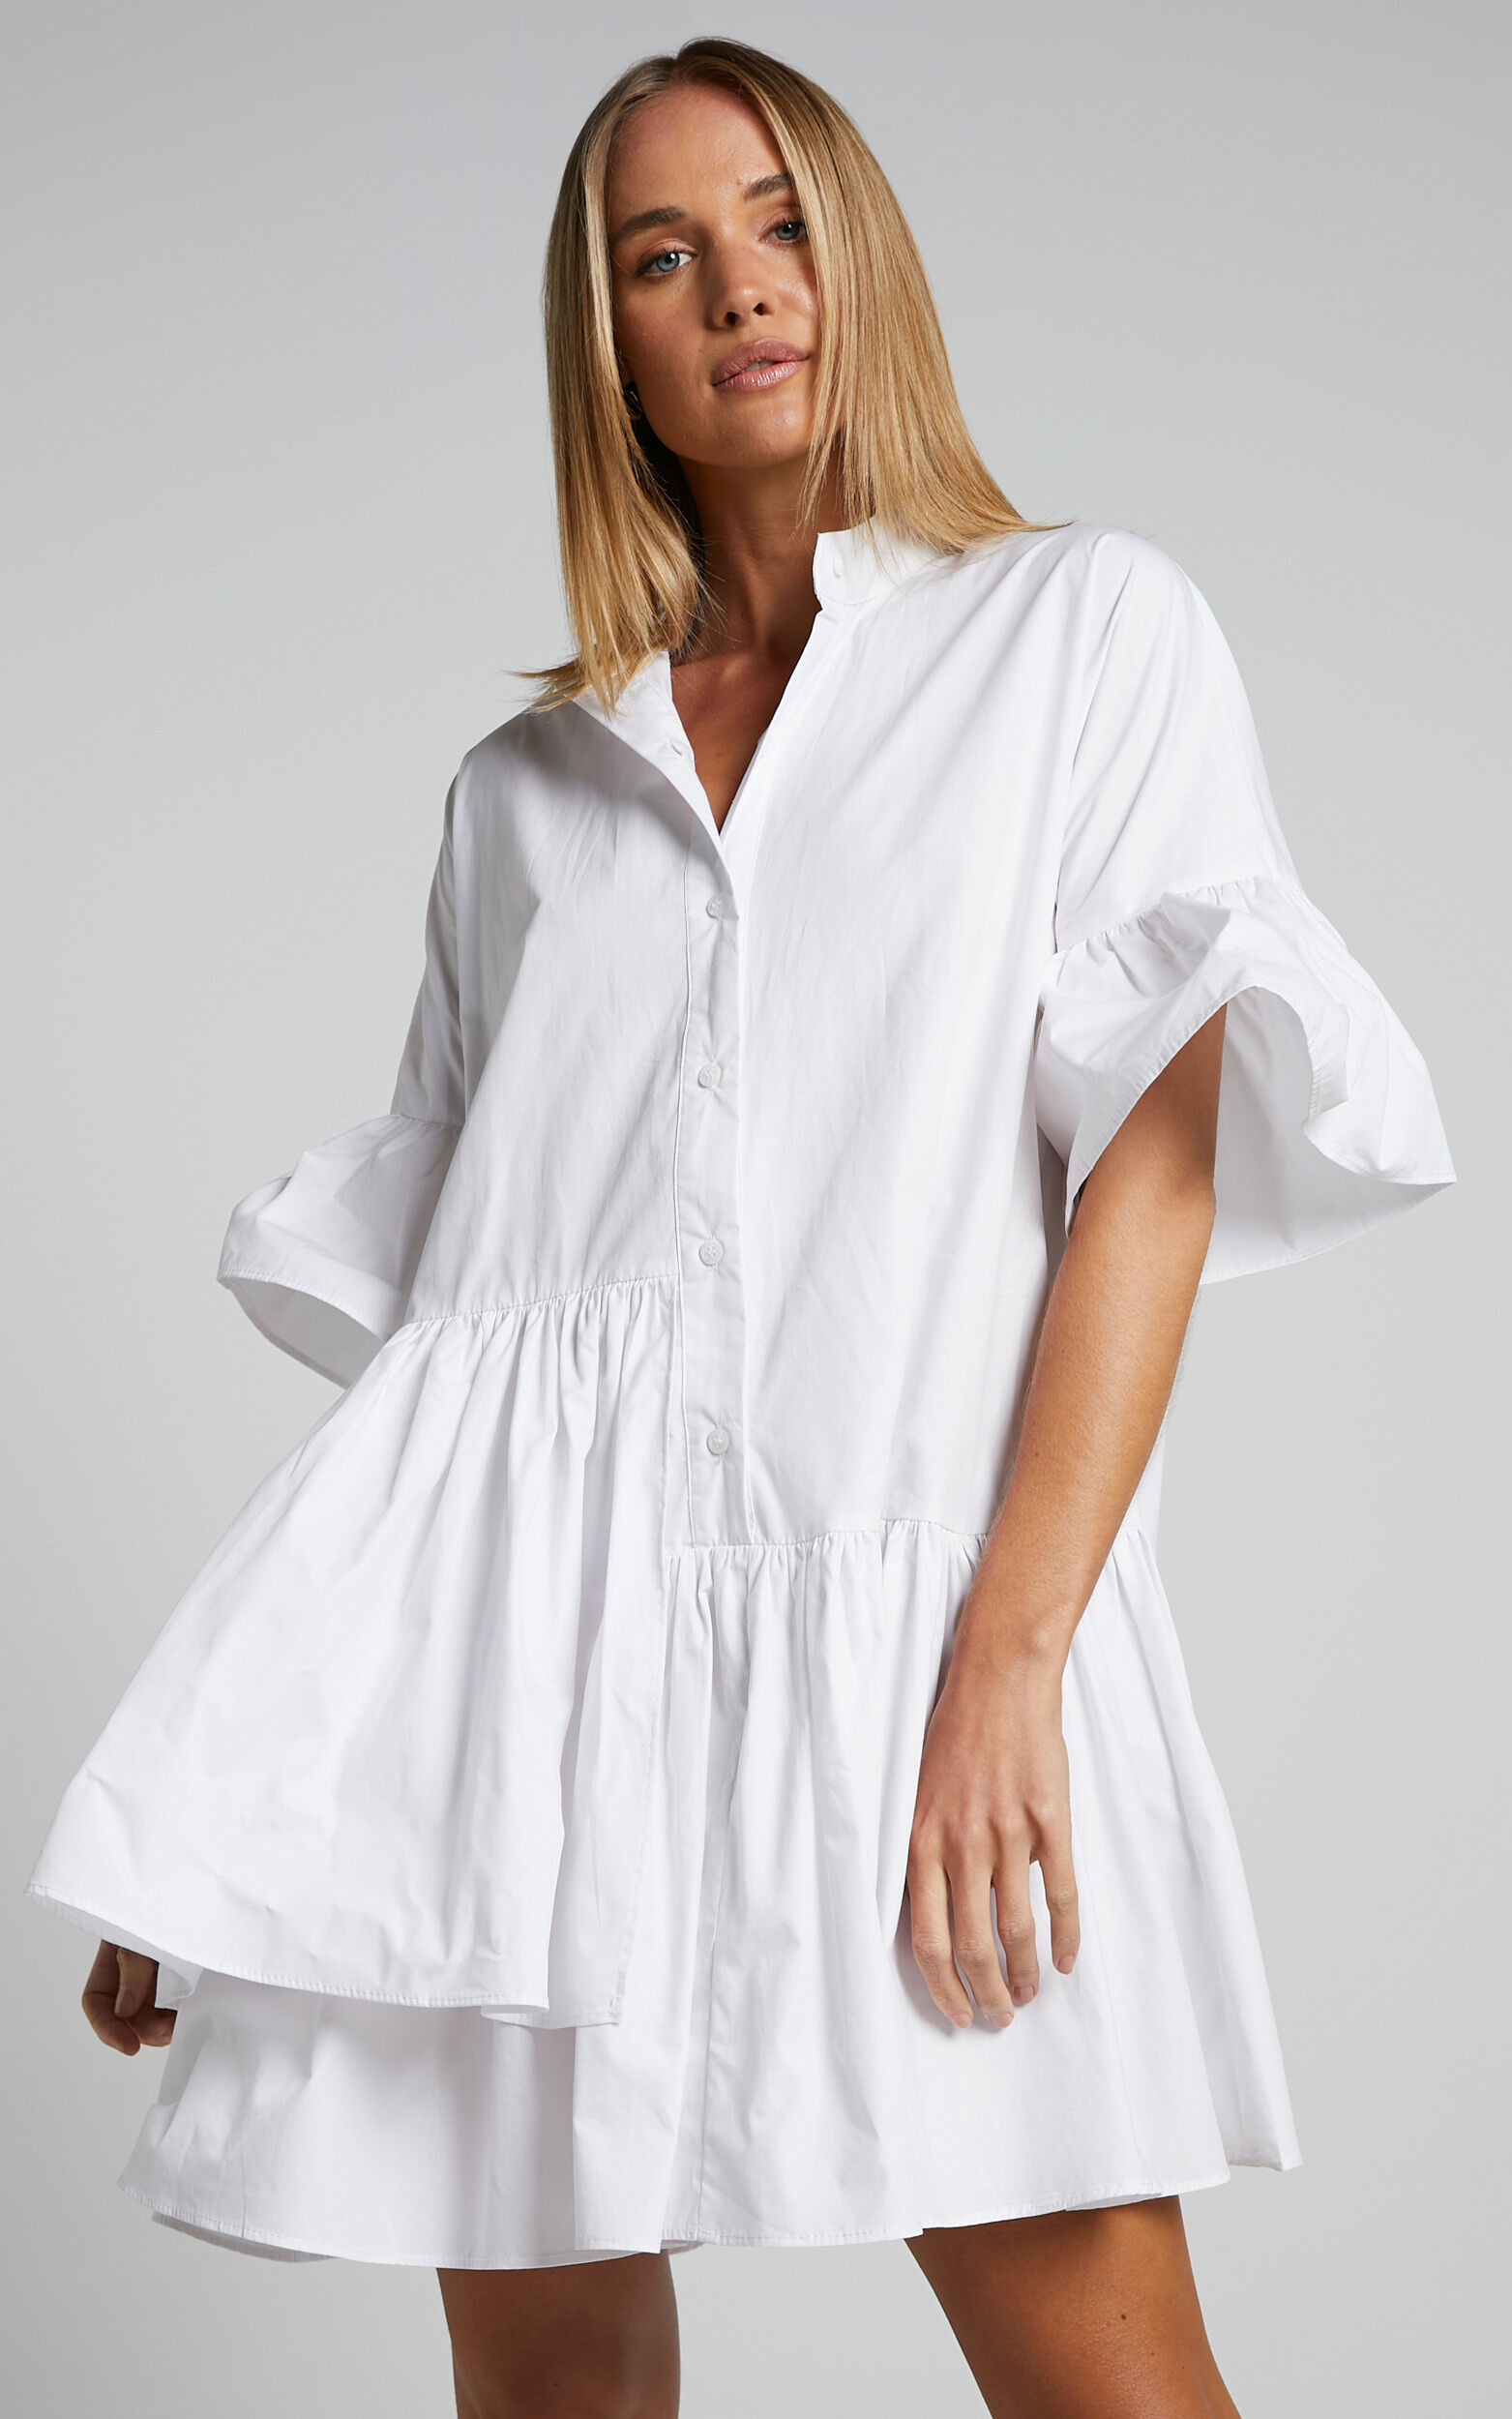 Elowen Mini Dress - Button Up Asymmetrical Tiered Smock Dress in White - 06, WHT1, super-hi-res image number null